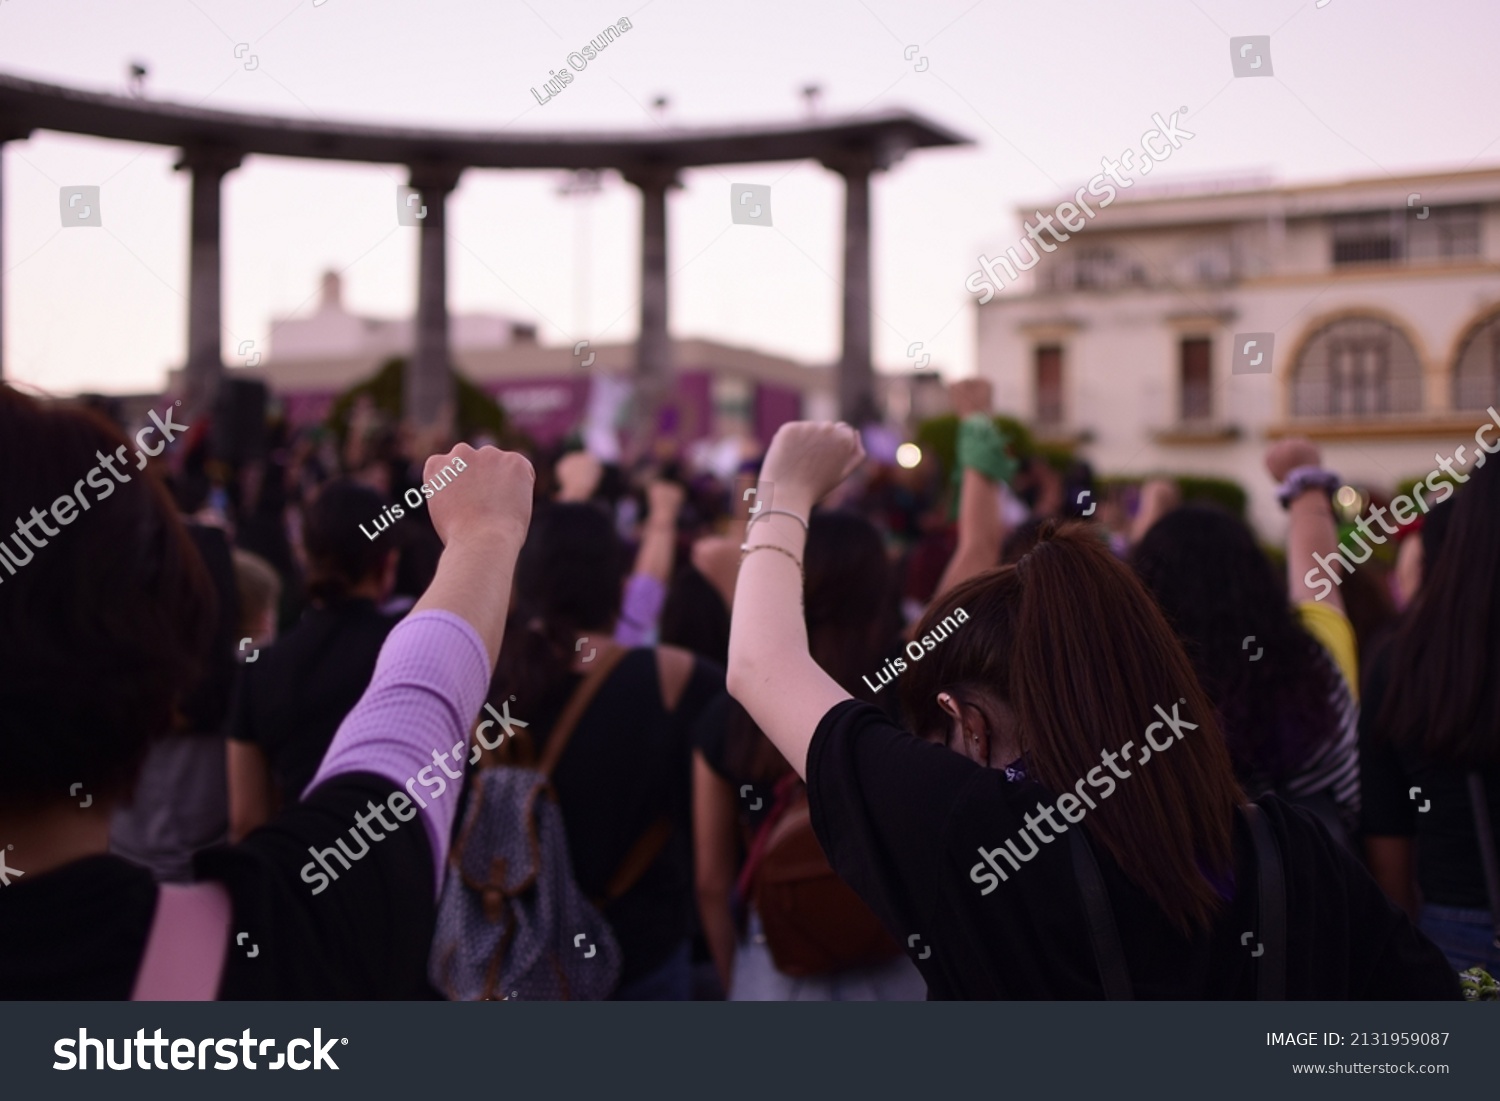 Young women raising their fist in protest against violence, for women's empowerment, feminism, freedom, gender equity, sorority. #2131959087